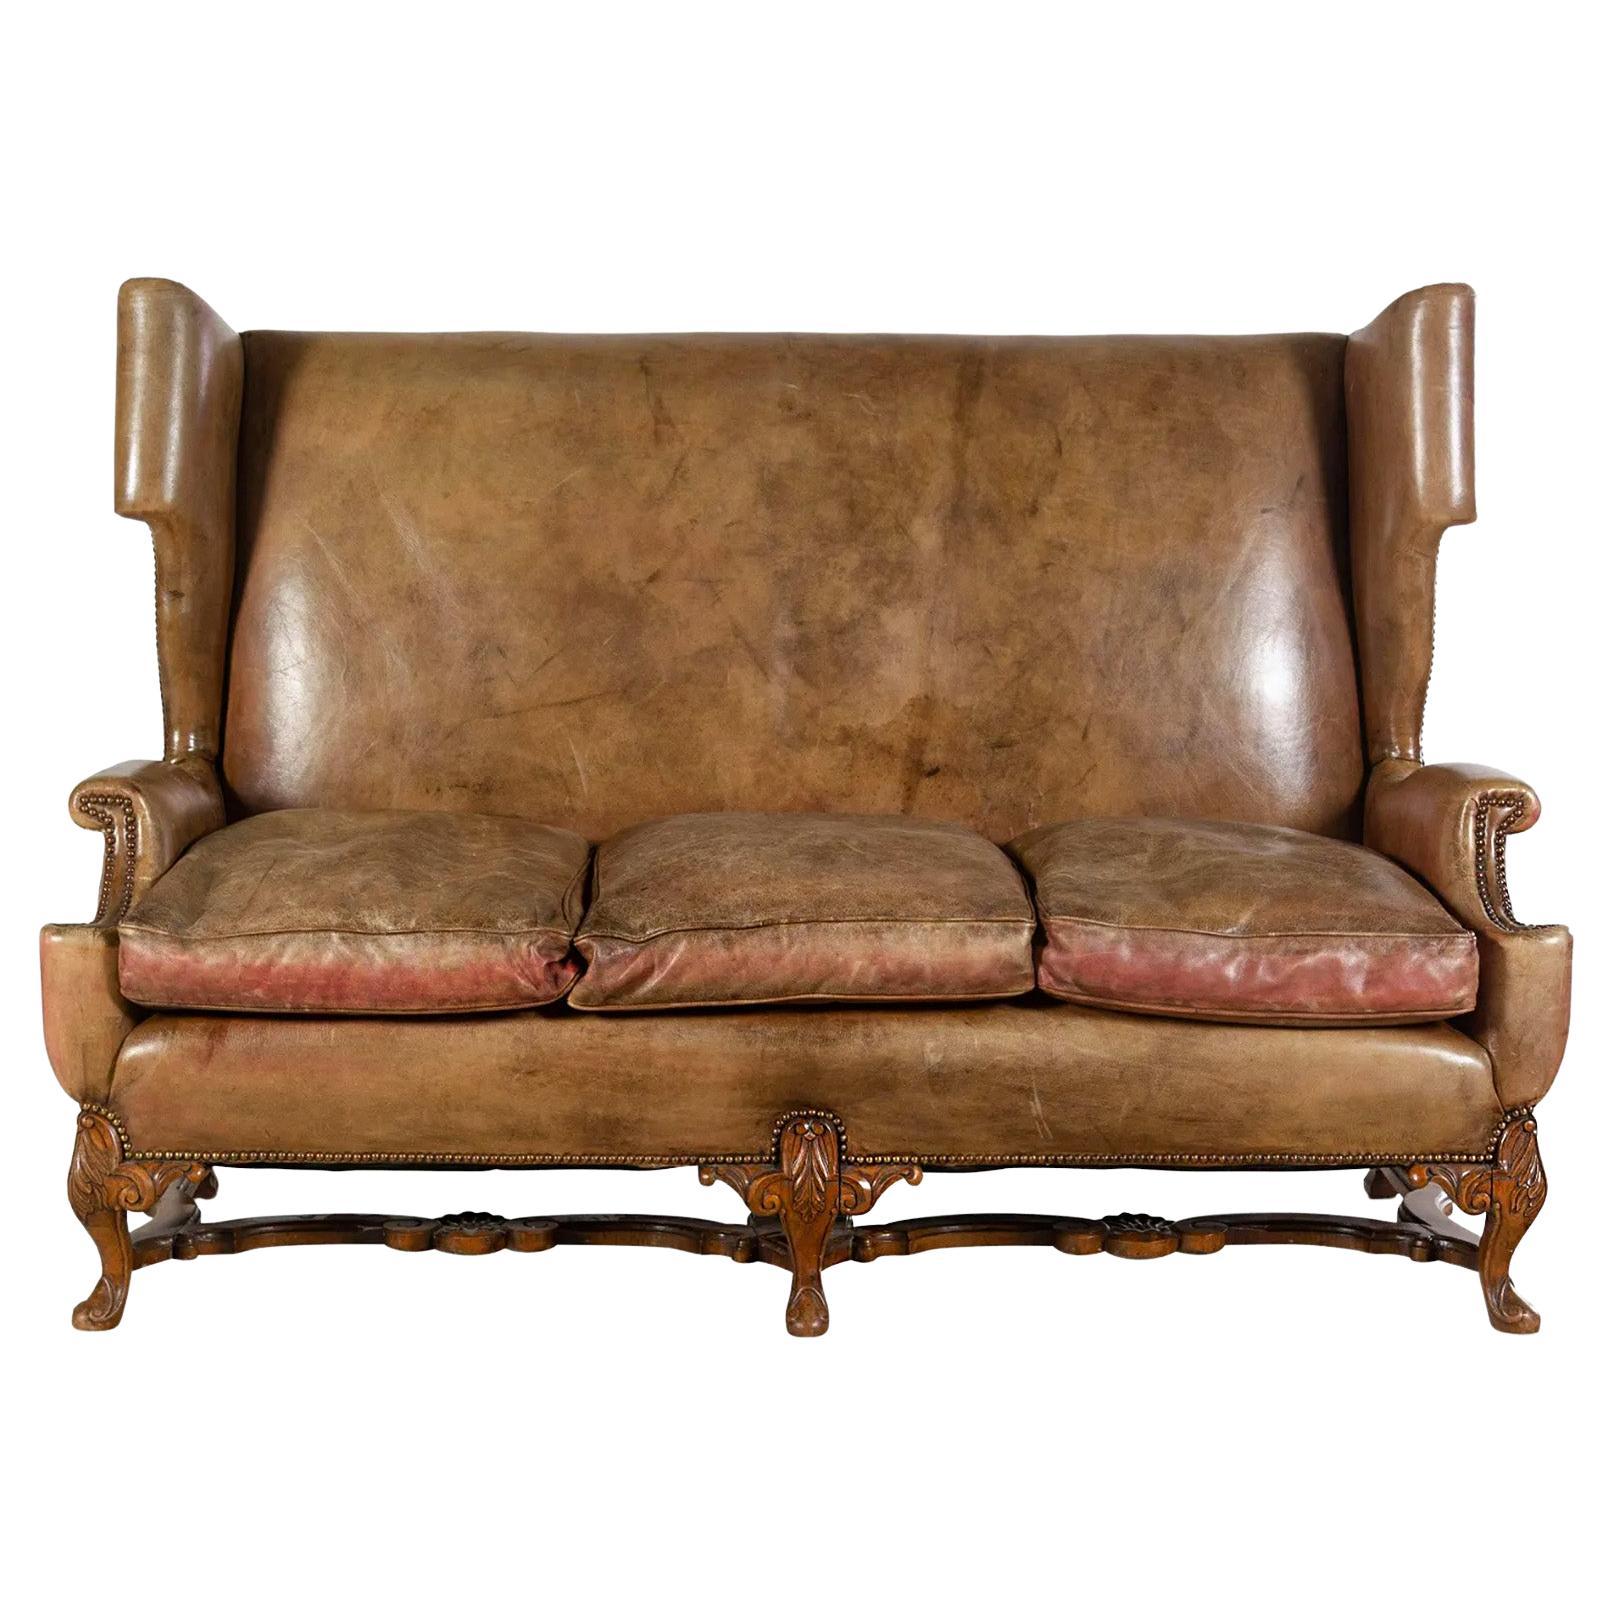 Early 20th Century English Leather Sofa For Sale